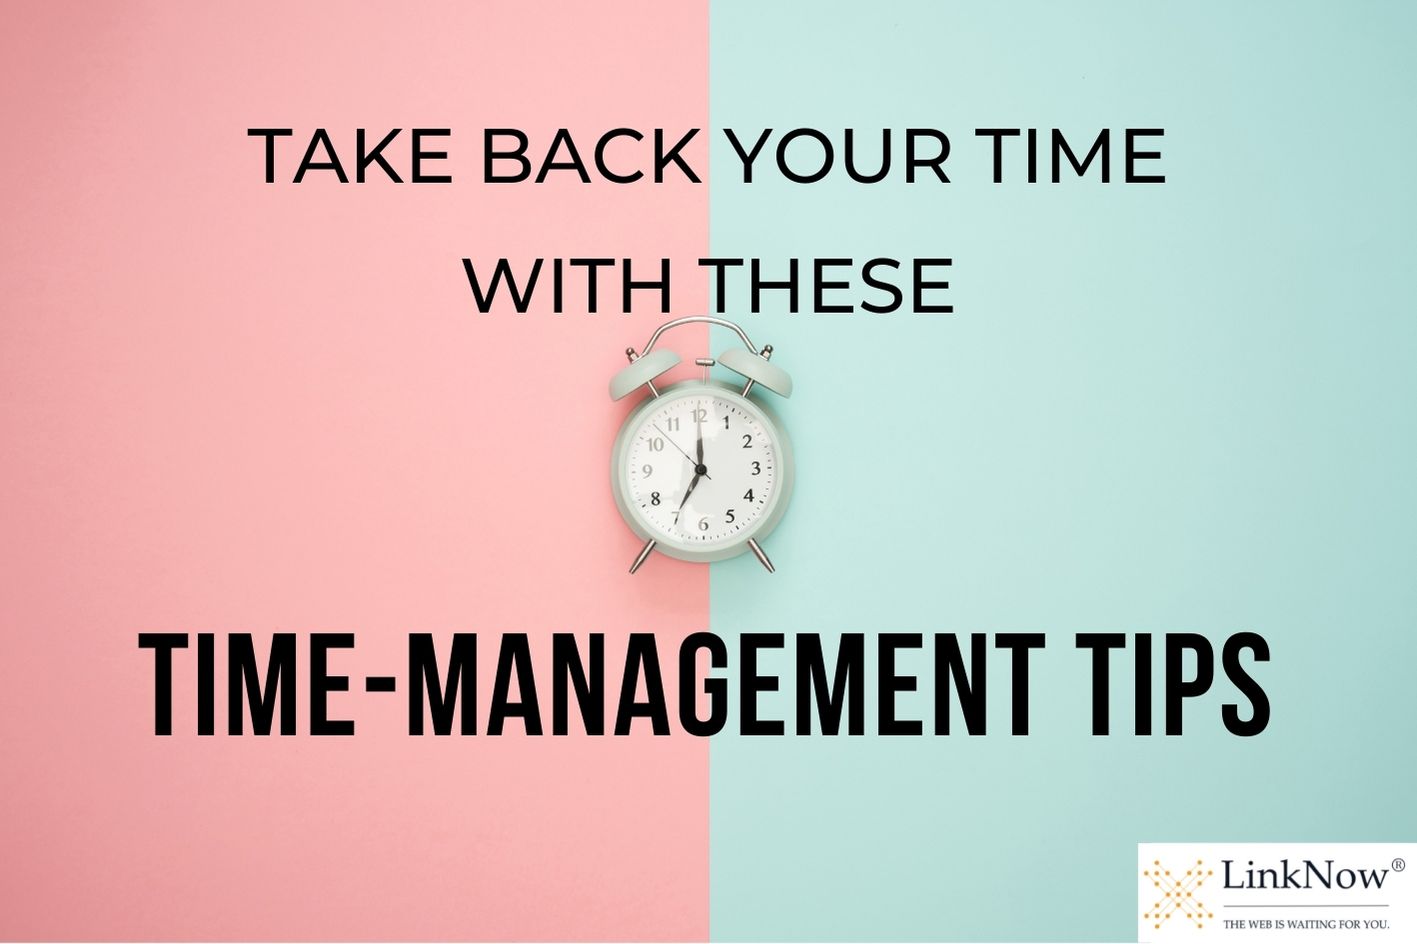 Alarm clock in foreground with text: Take back your time with these time-management tips.